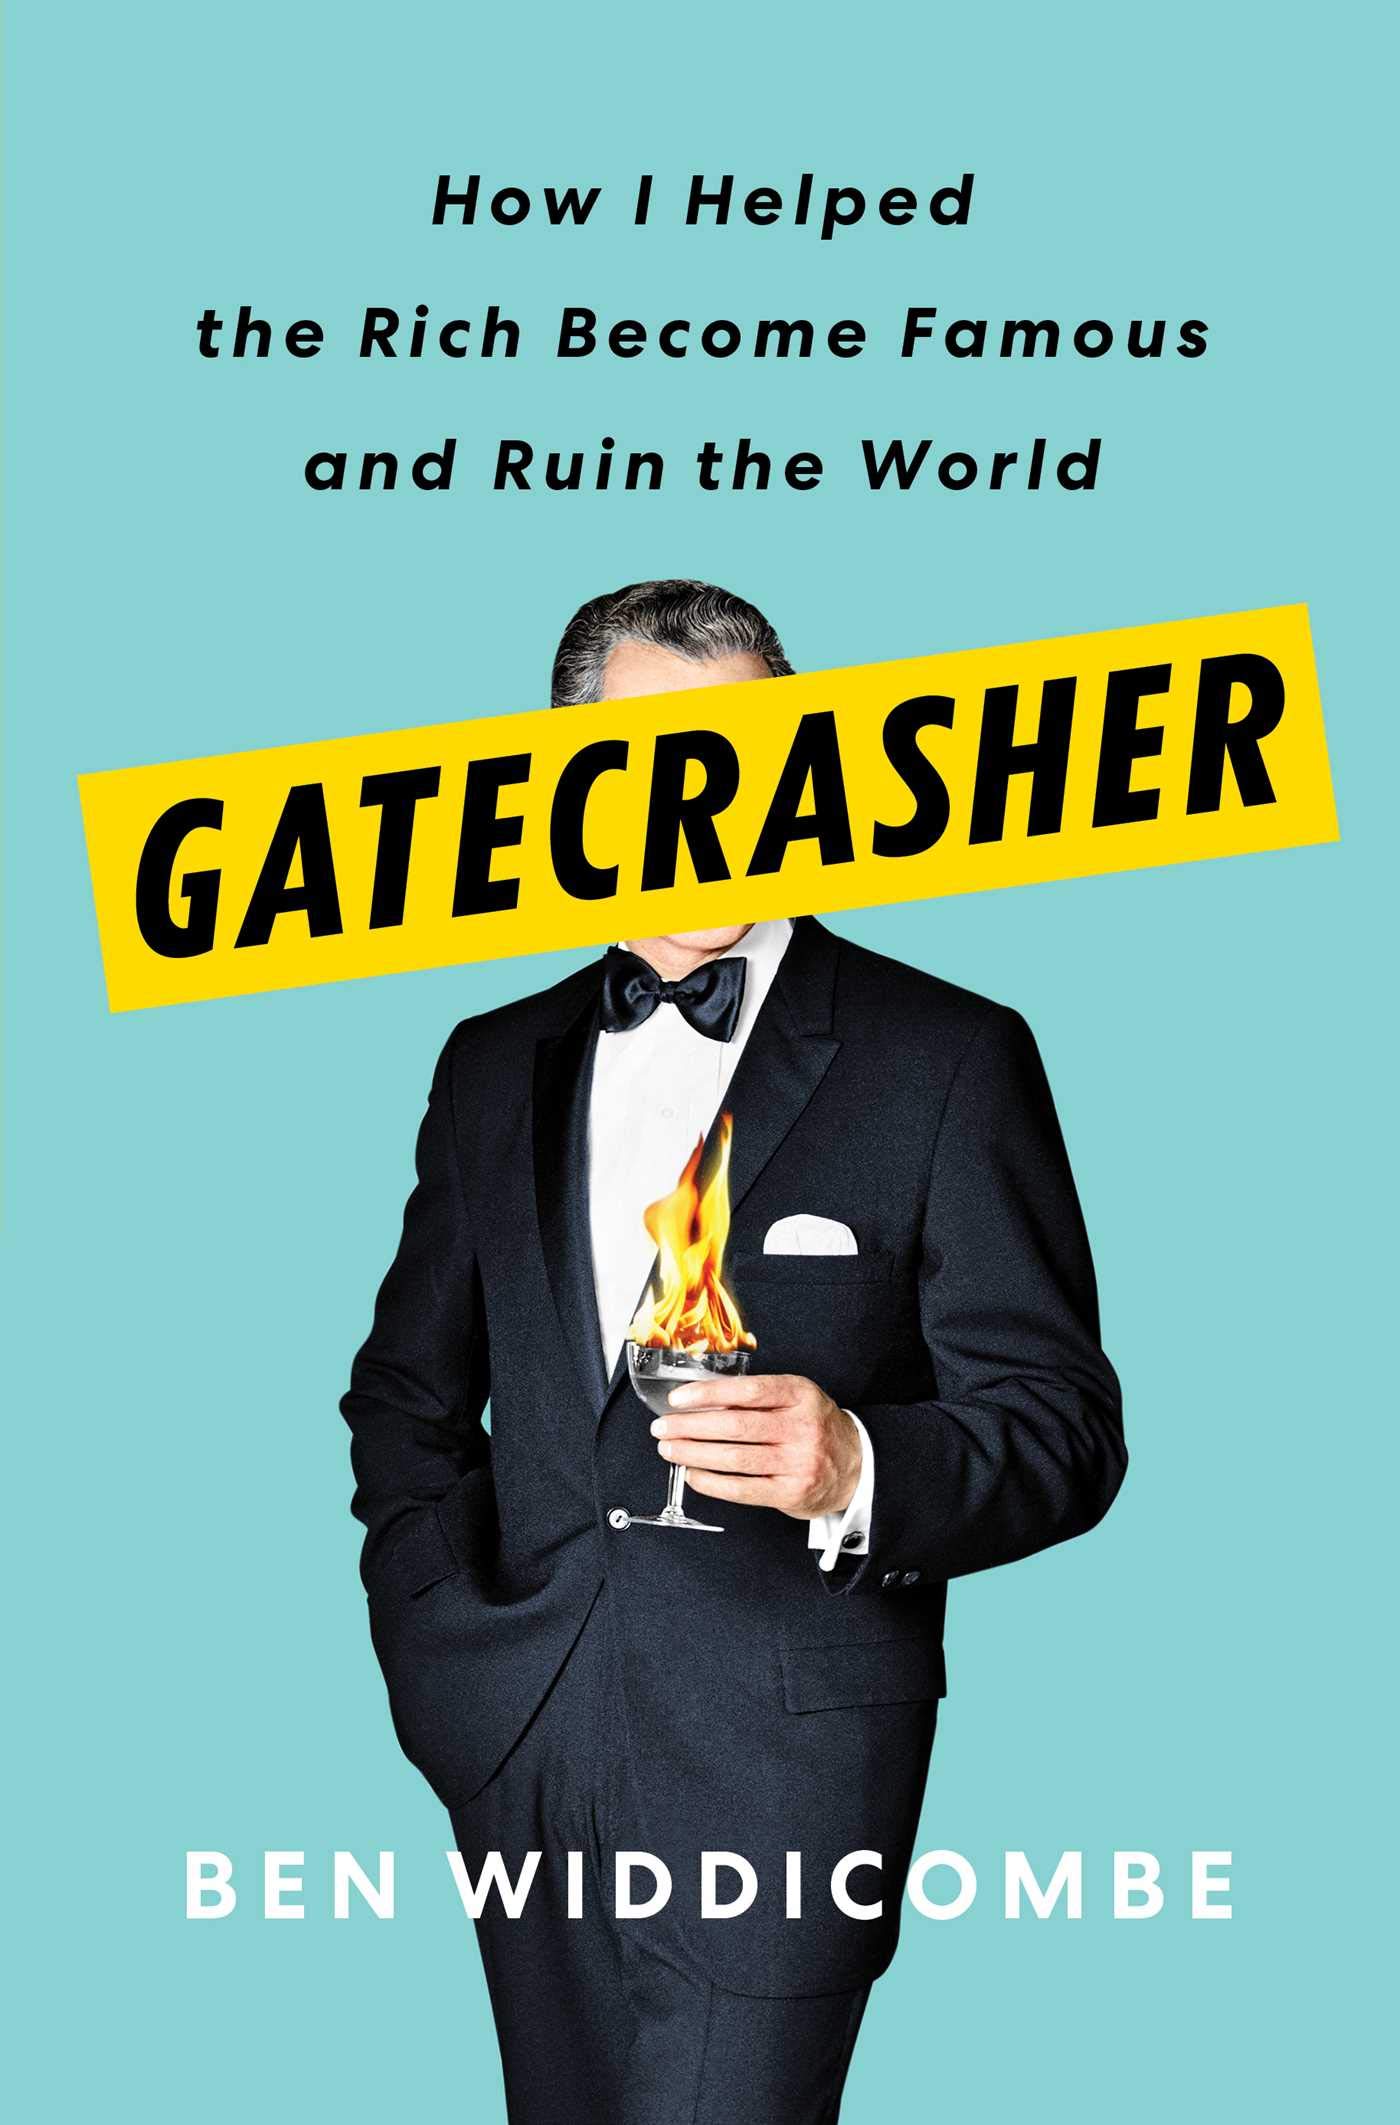 The cover of Gatecrasher: How I Helped the Rich Become Famous and Ruin the World